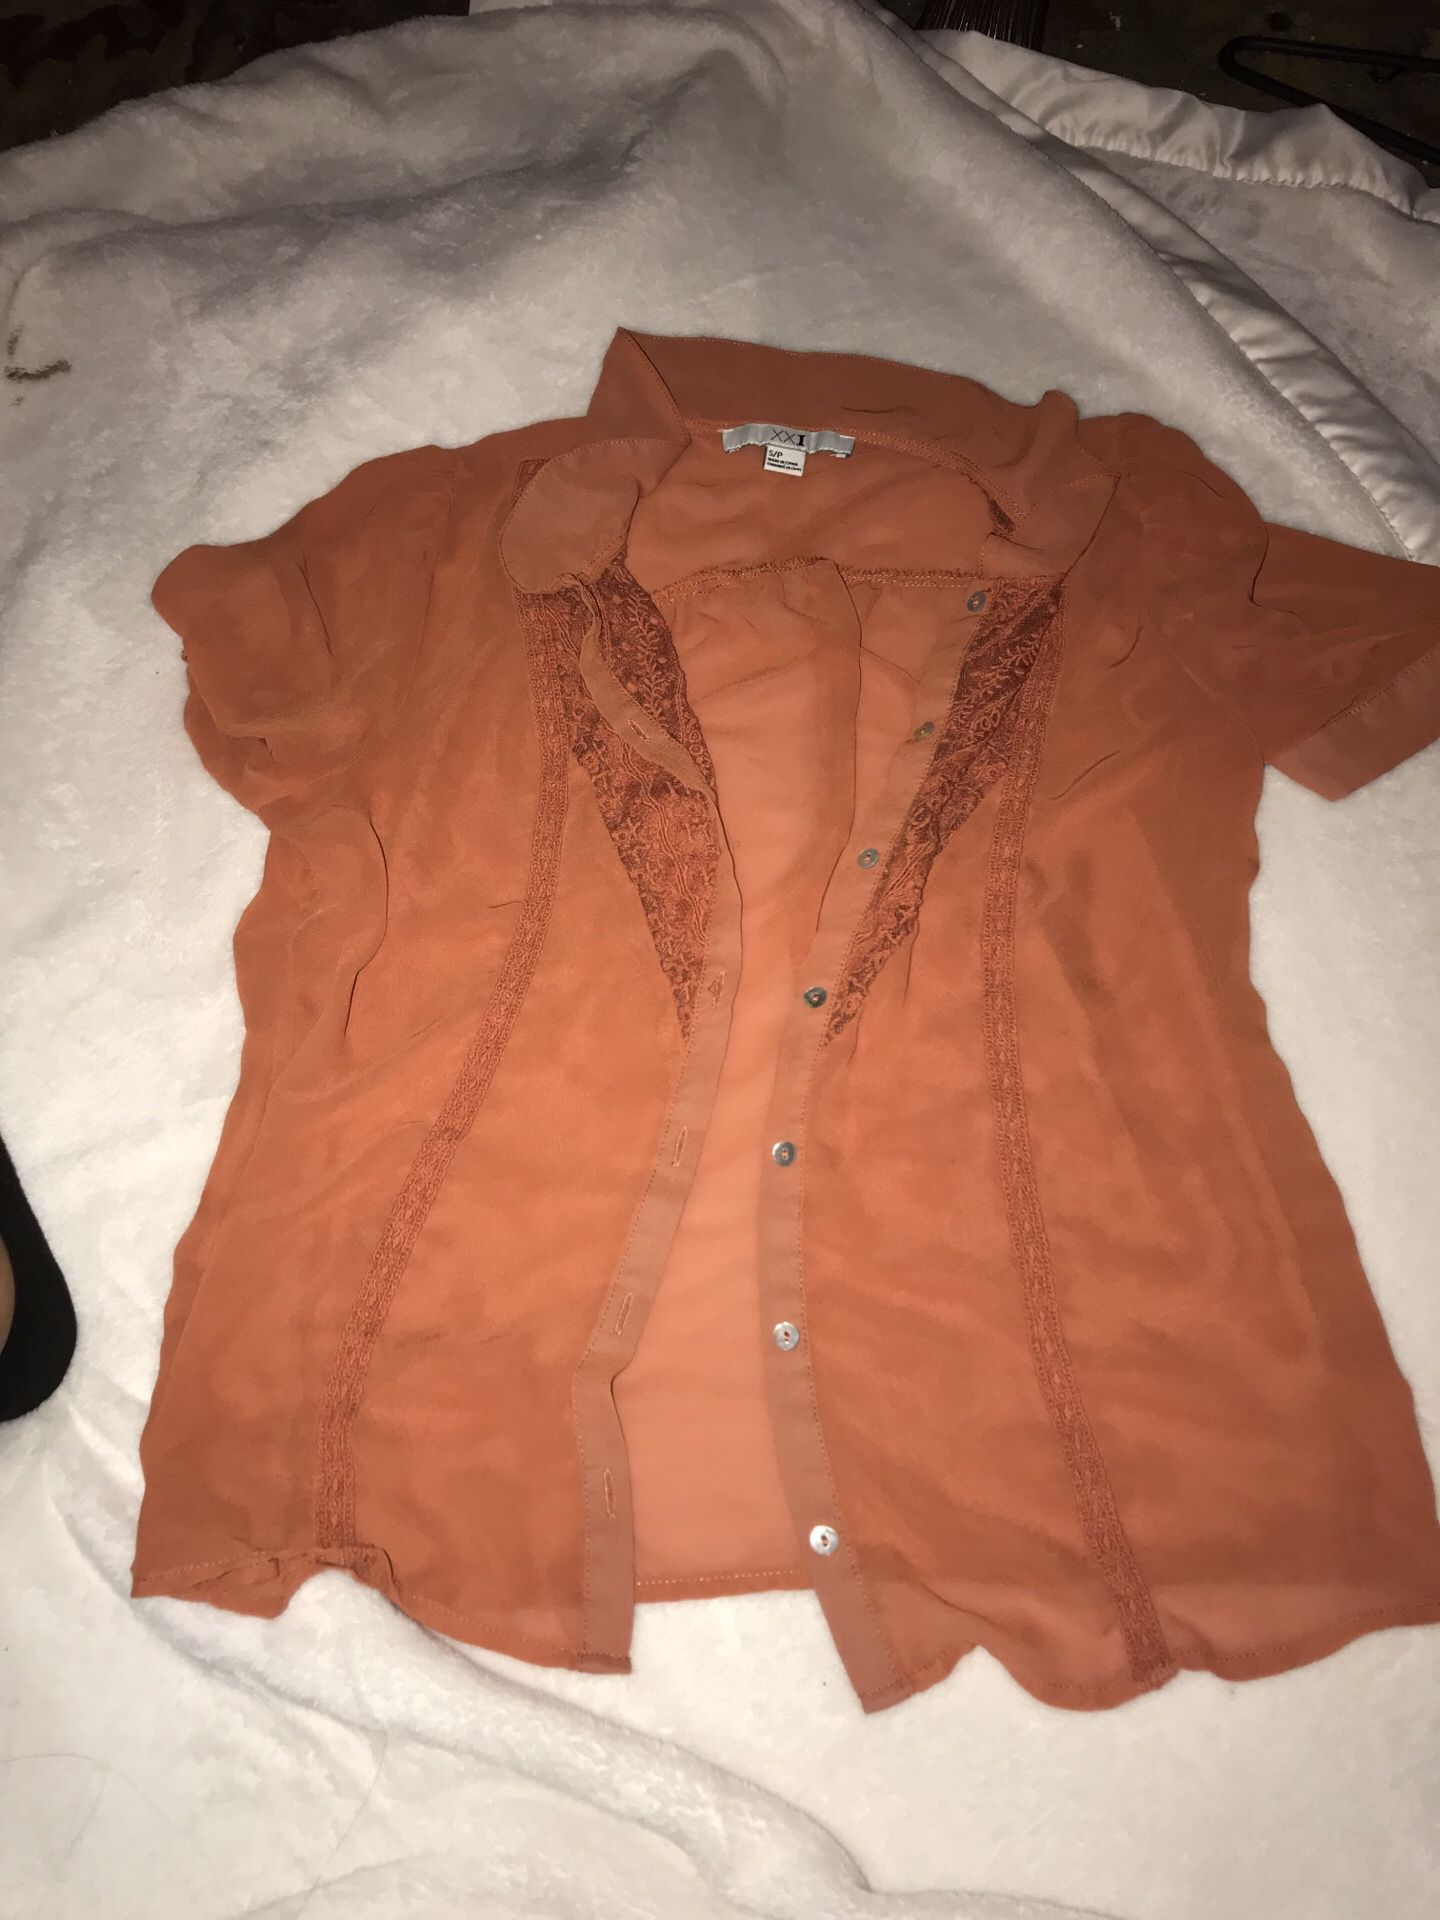 Forever 21 shirt size Small